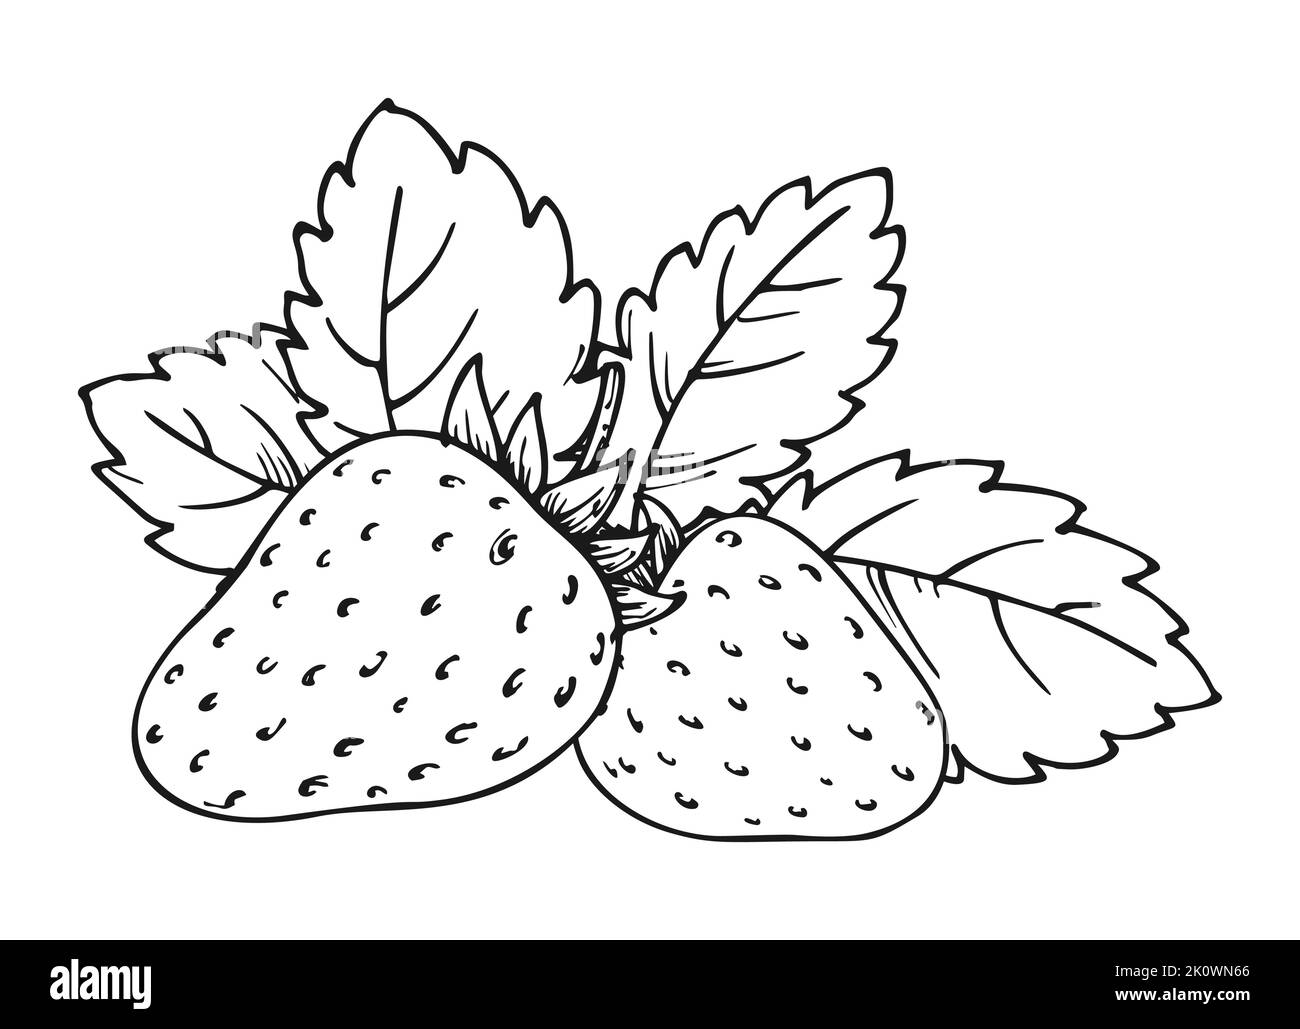 Strawberry bunch of two berries. Whole ripe wild forest berry with leaves. Tasty sweet fresh fruit. Children and adults coloring book page. Juicy strawberries handdrawn clip art black white sketch Stock Vector